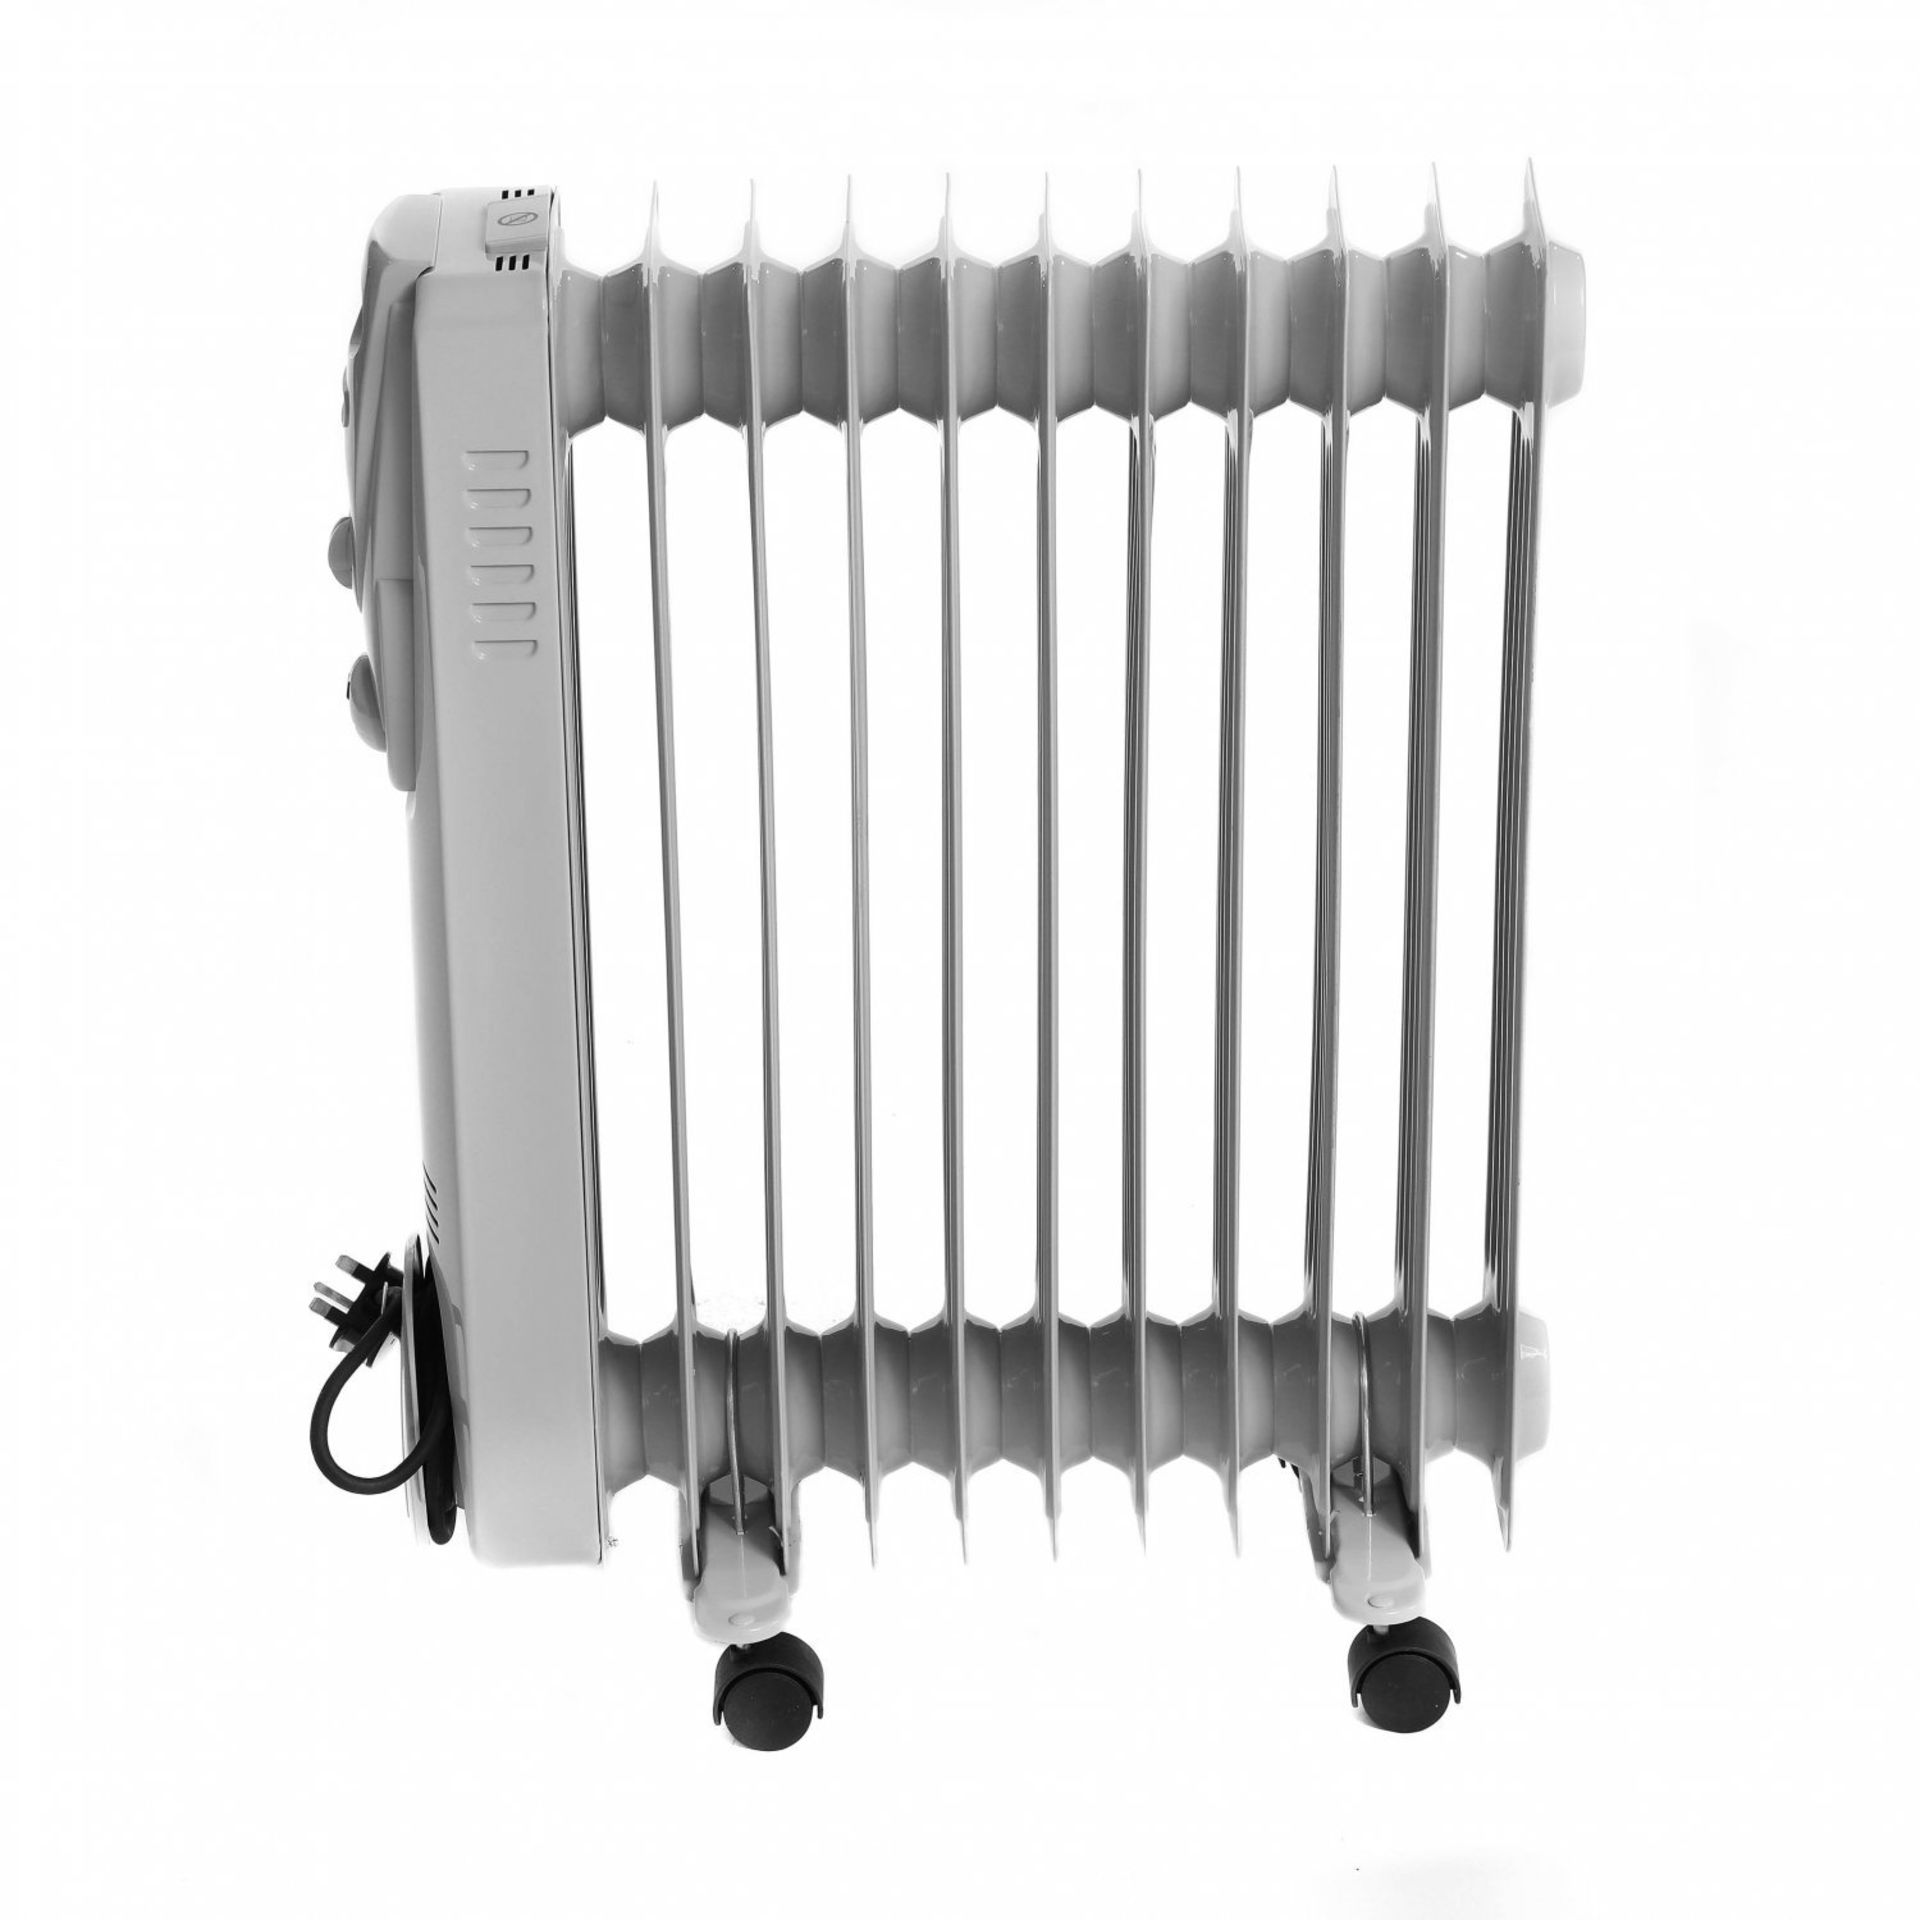 (KK212) 2500W 11 Fin Portable Oil Filled Radiator Electric Heater The 2500W Oil Filled Radia... - Image 2 of 2